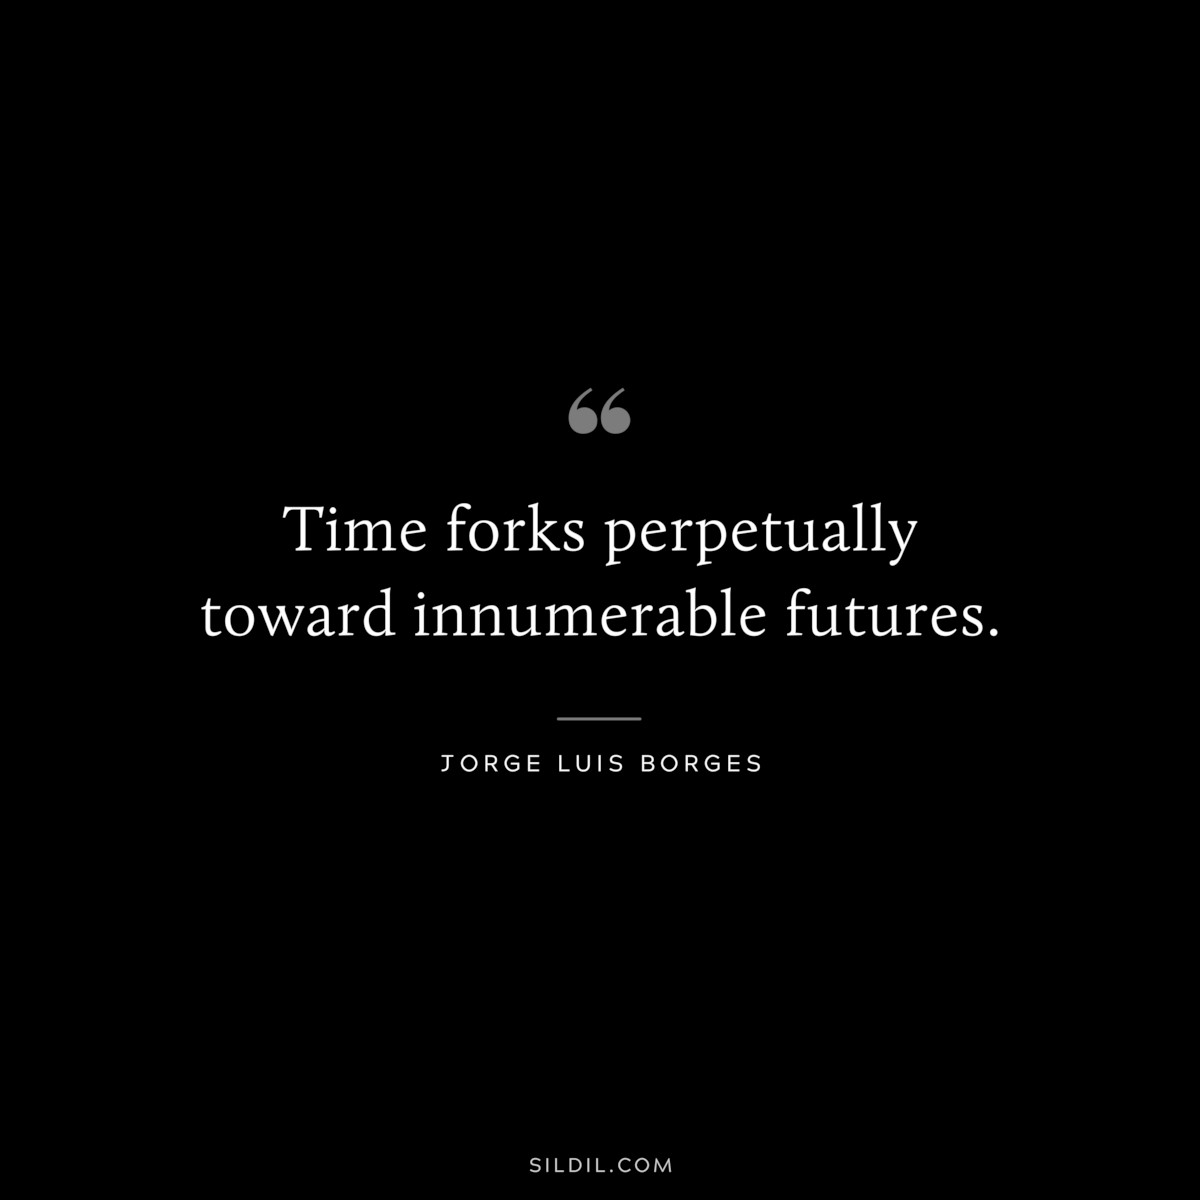 Time forks perpetually toward innumerable futures. ― Jorge Luis Borges